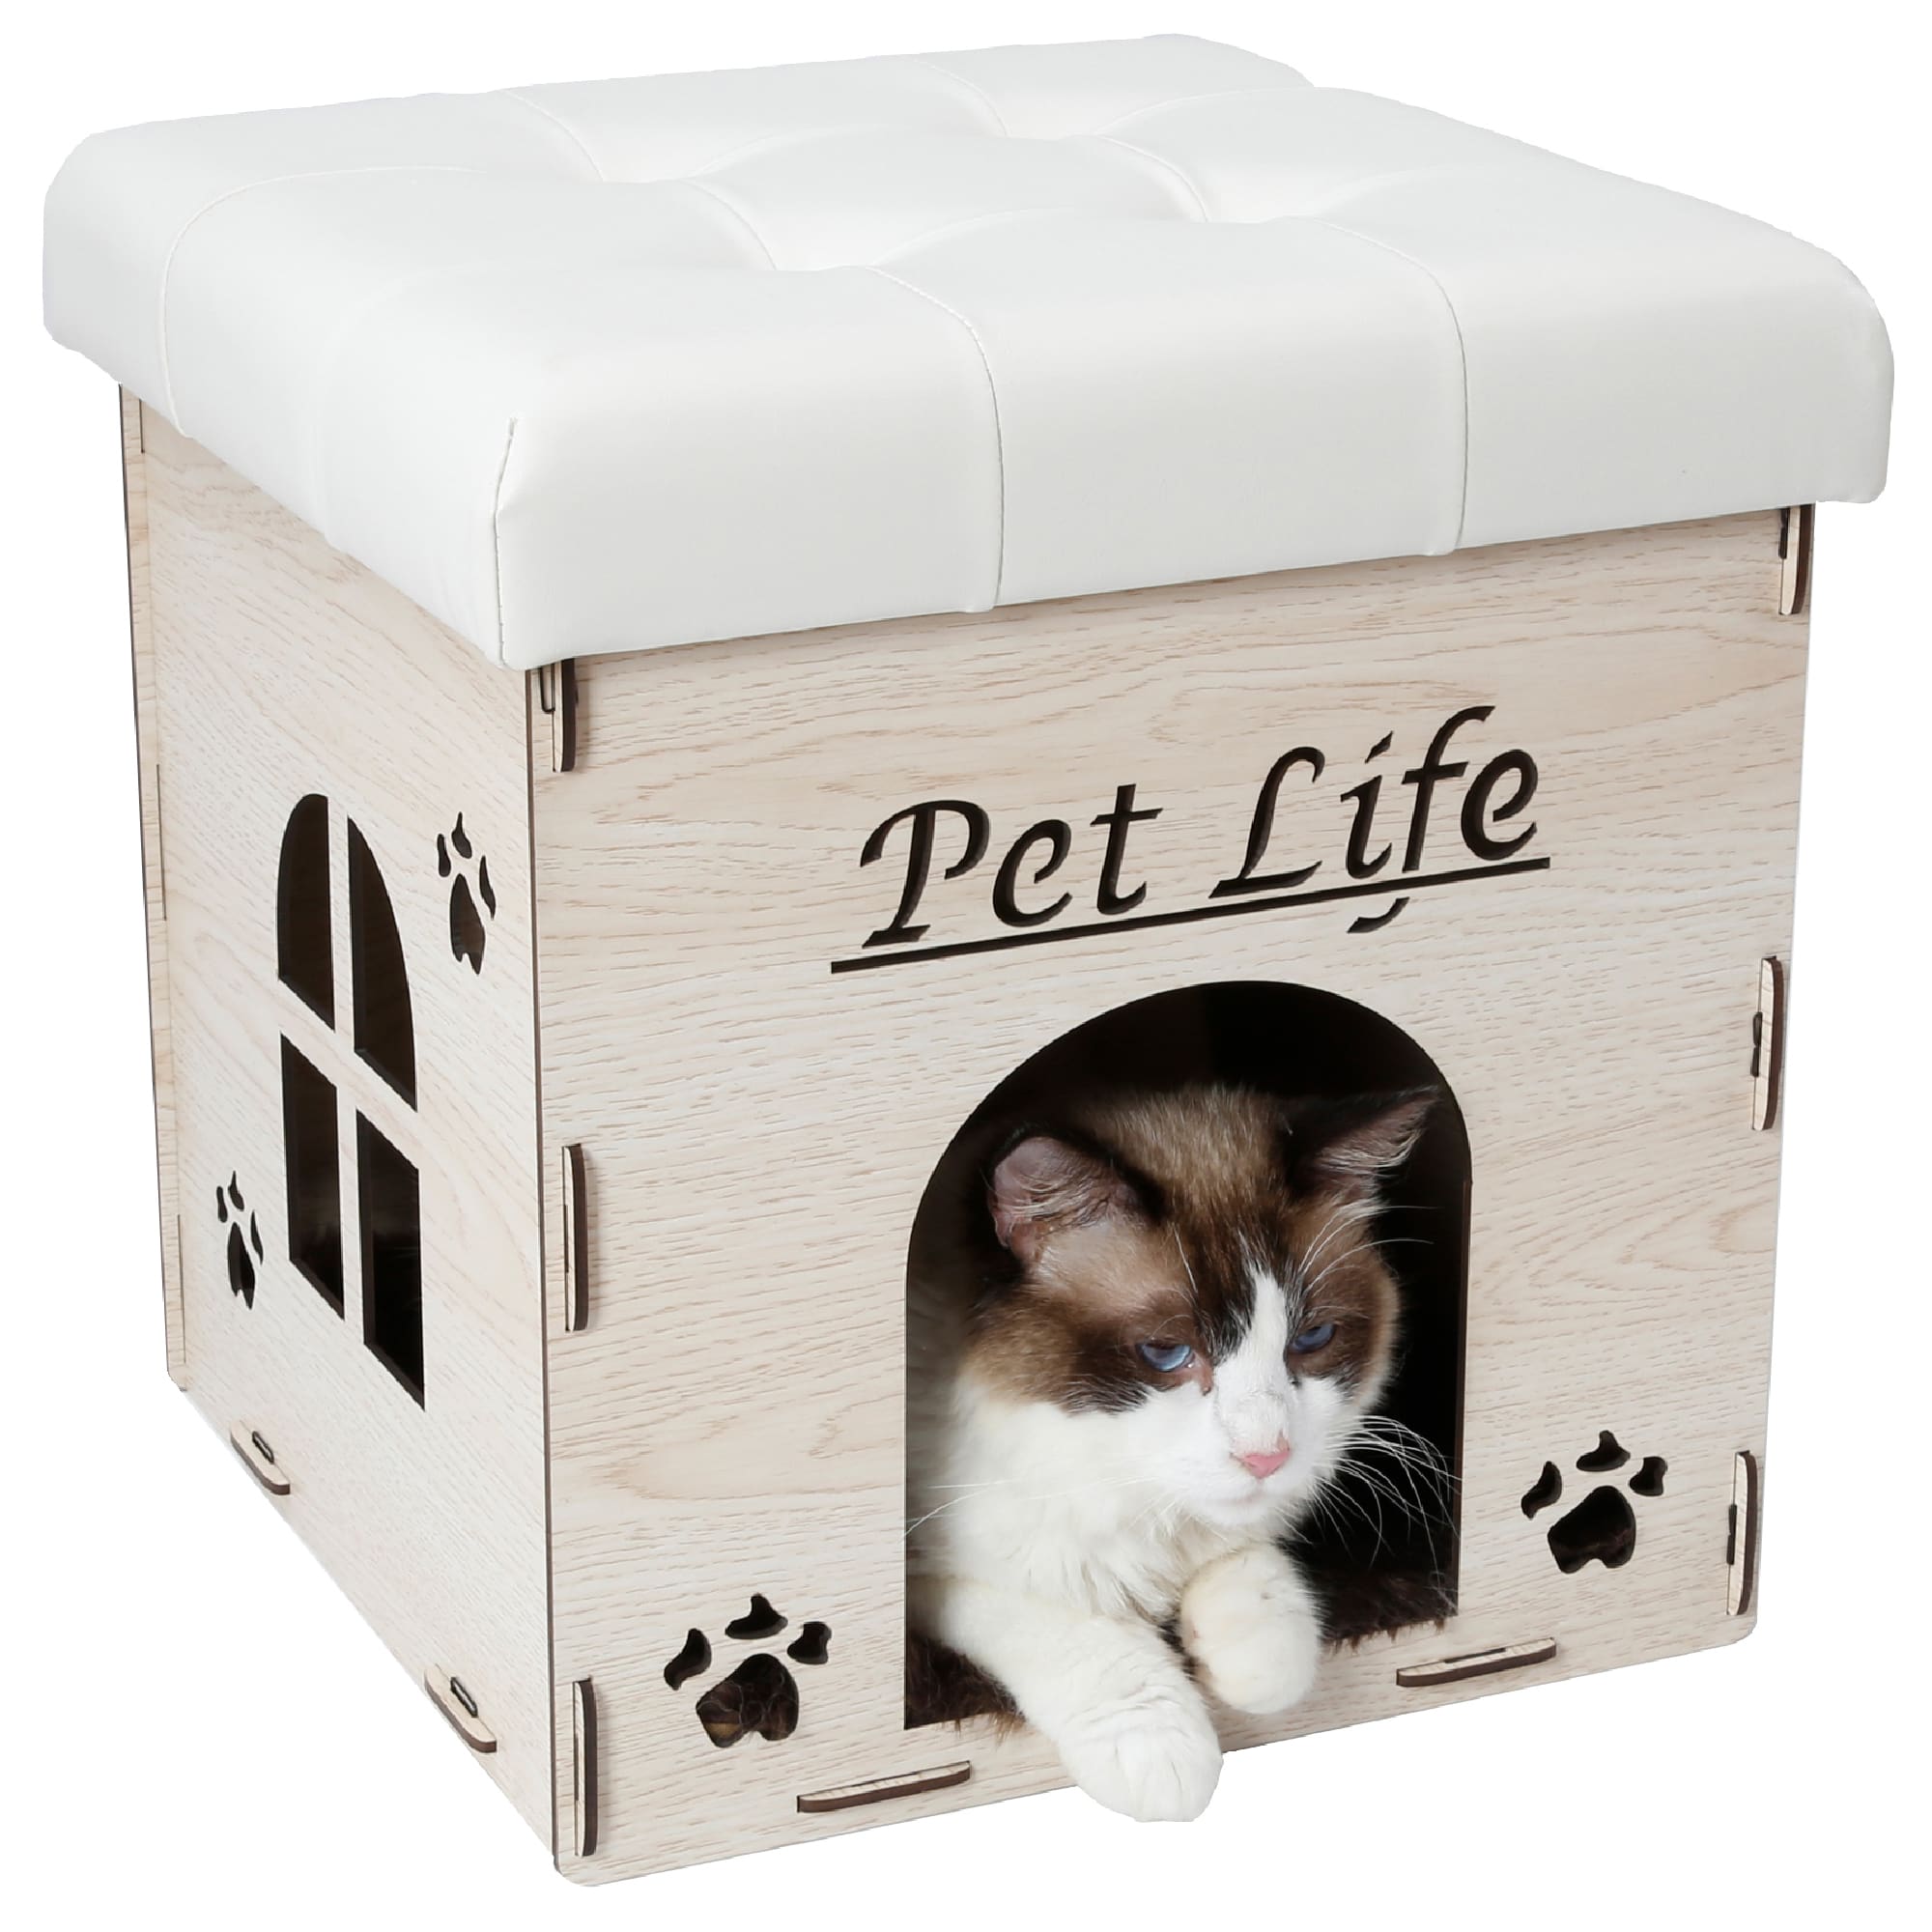 Photos - Cat Bed / House Pet Life White Foldaway Collapsible Designer Cat House Furniture 